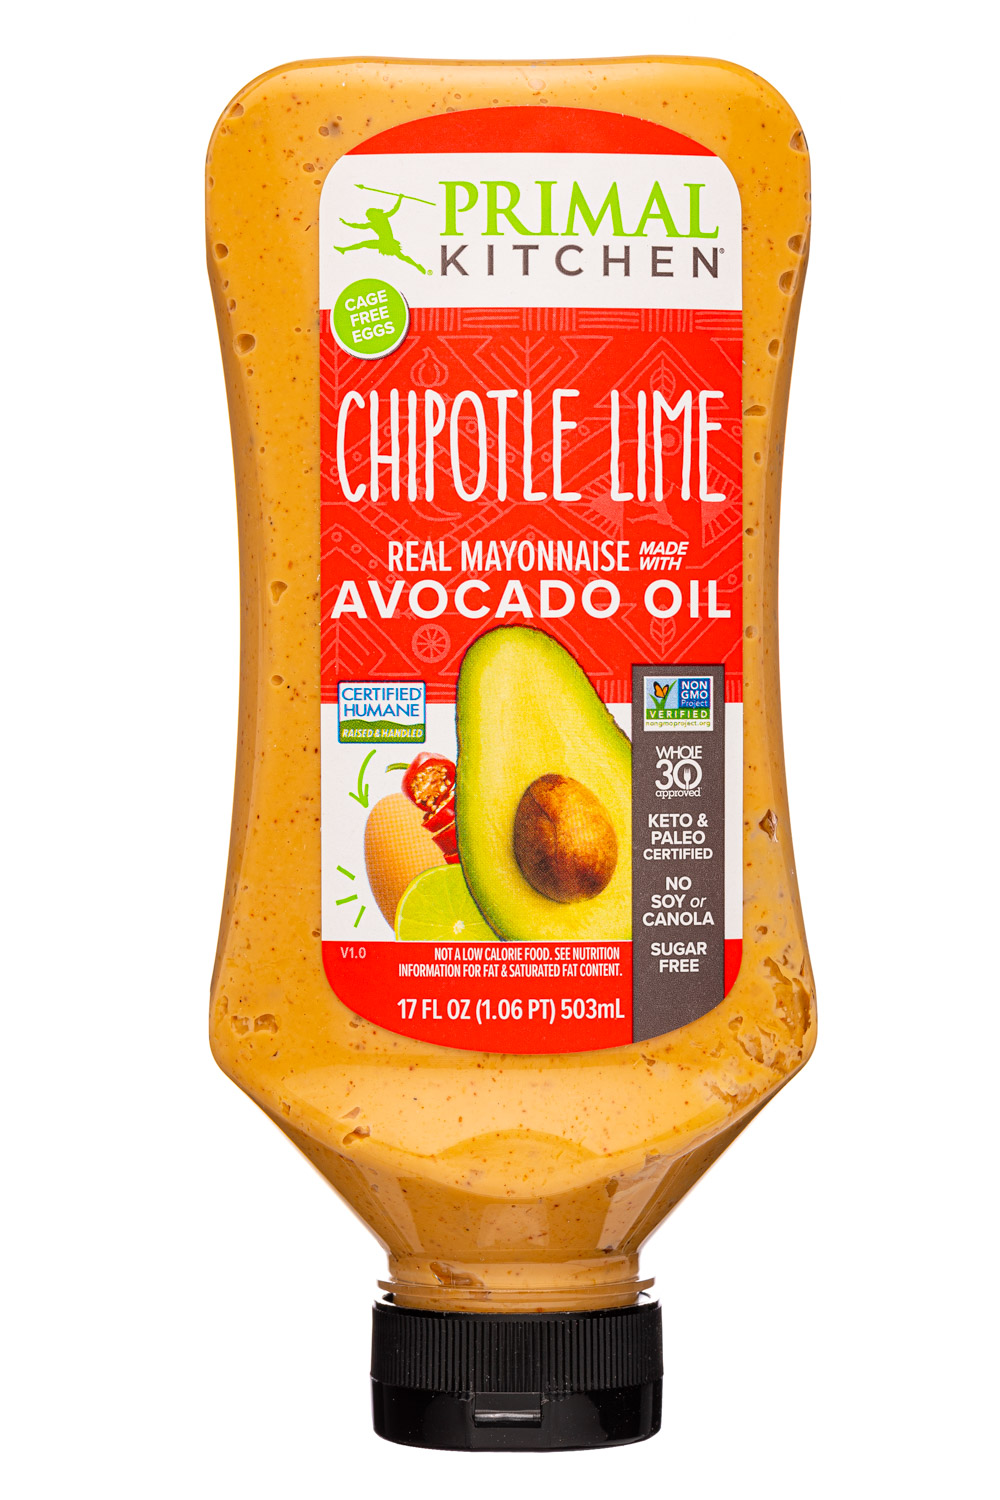 Primal Kitchen Mayo made with Avocado Oil Variety Pack, Original & Chipotle  Lime, Whole30 Approved, Certified Paleo, and Keto Certified, 12 Ounces,  Pack of 2 Original & Chipotle Lime 12 Fl Oz (Pack of 2)